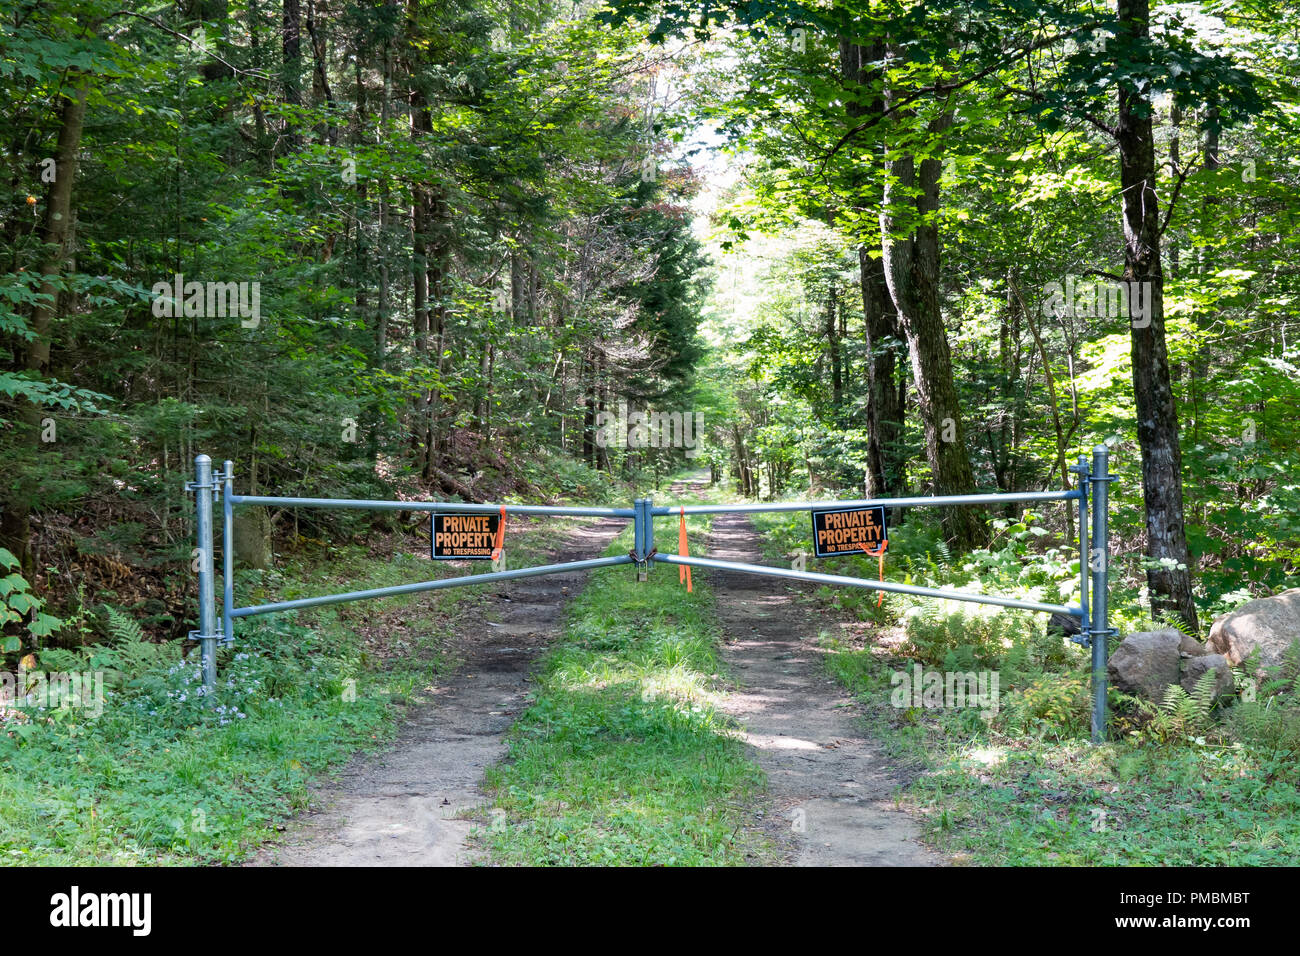 A locked metal gate on a forest road leading to private property in the Adirondack Mountains, NY, USA Stock Photo